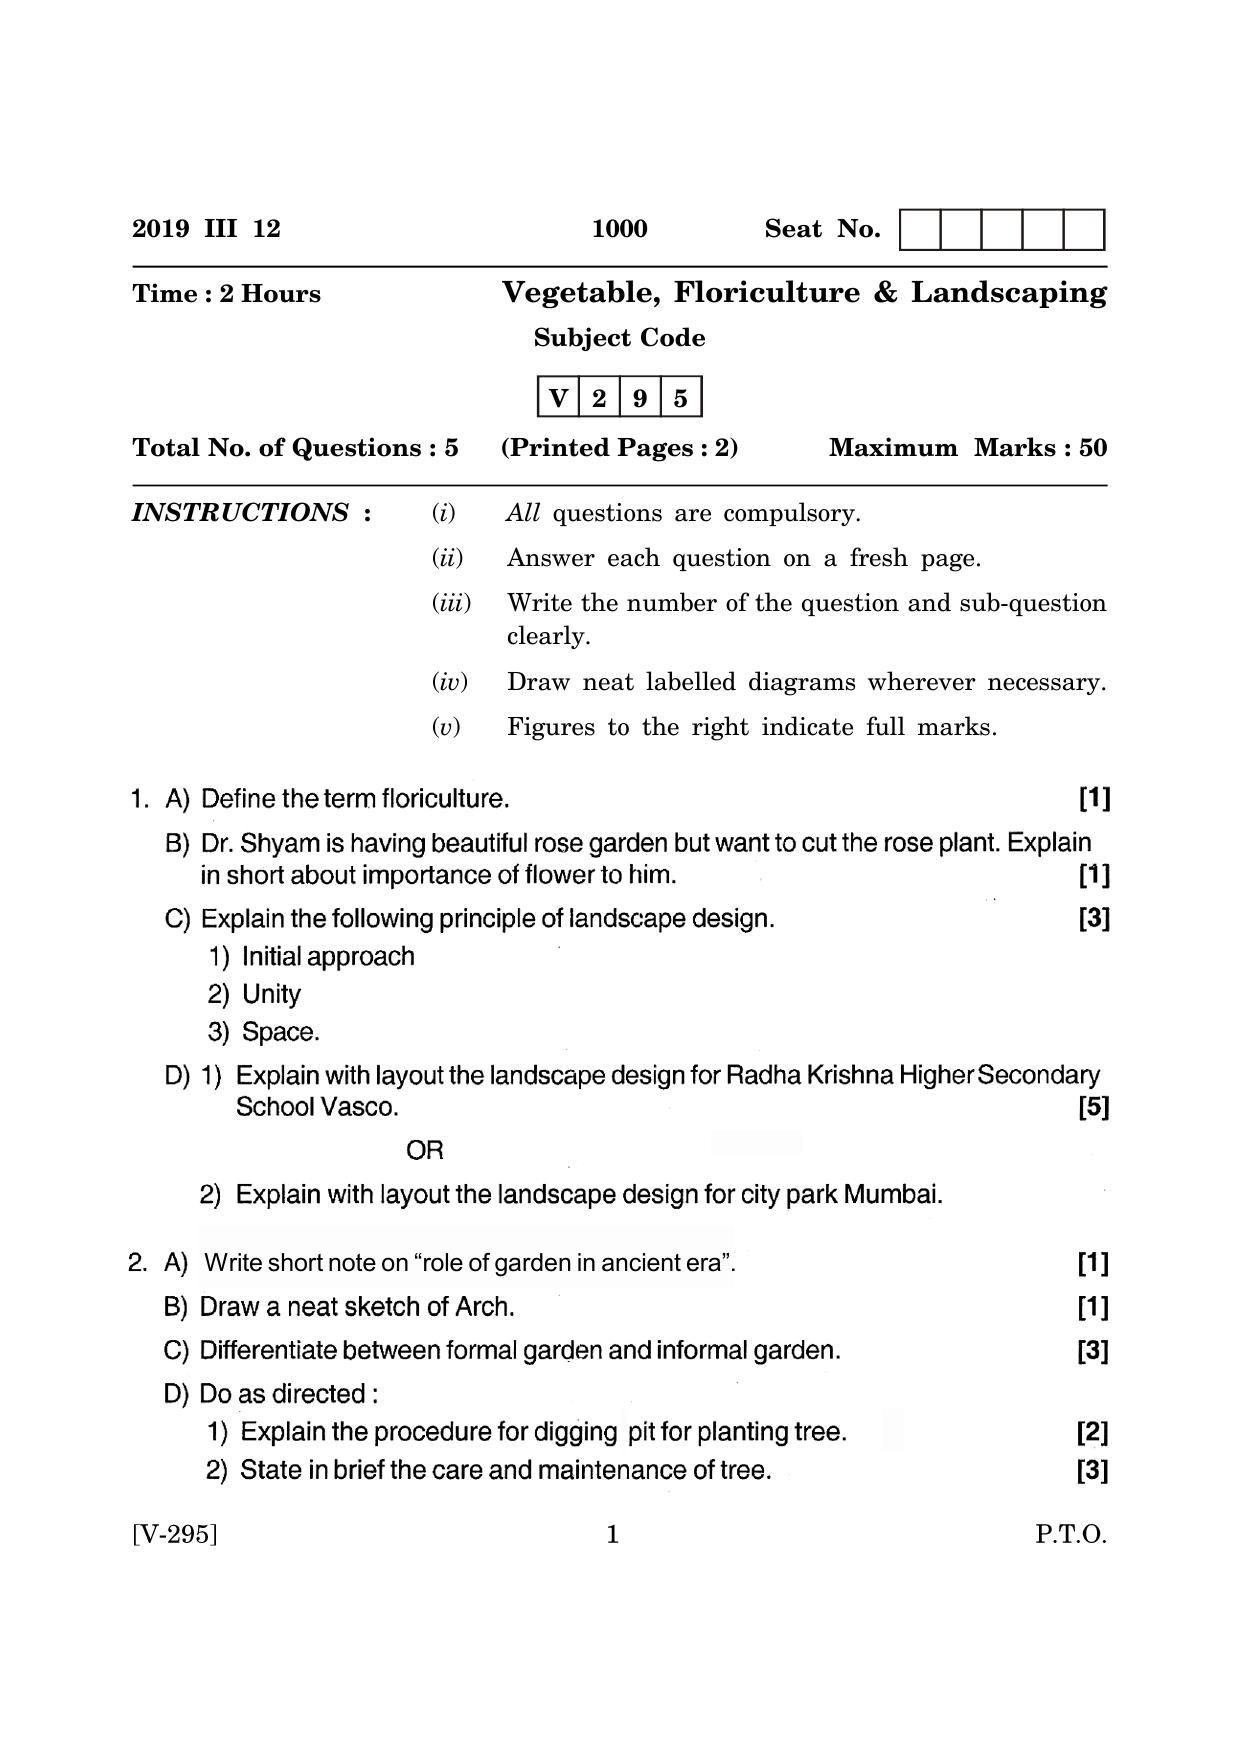 Goa Board Class 12 Vegetables Floriculture & Landscaping  2019 (March 2019) Question Paper - Page 1